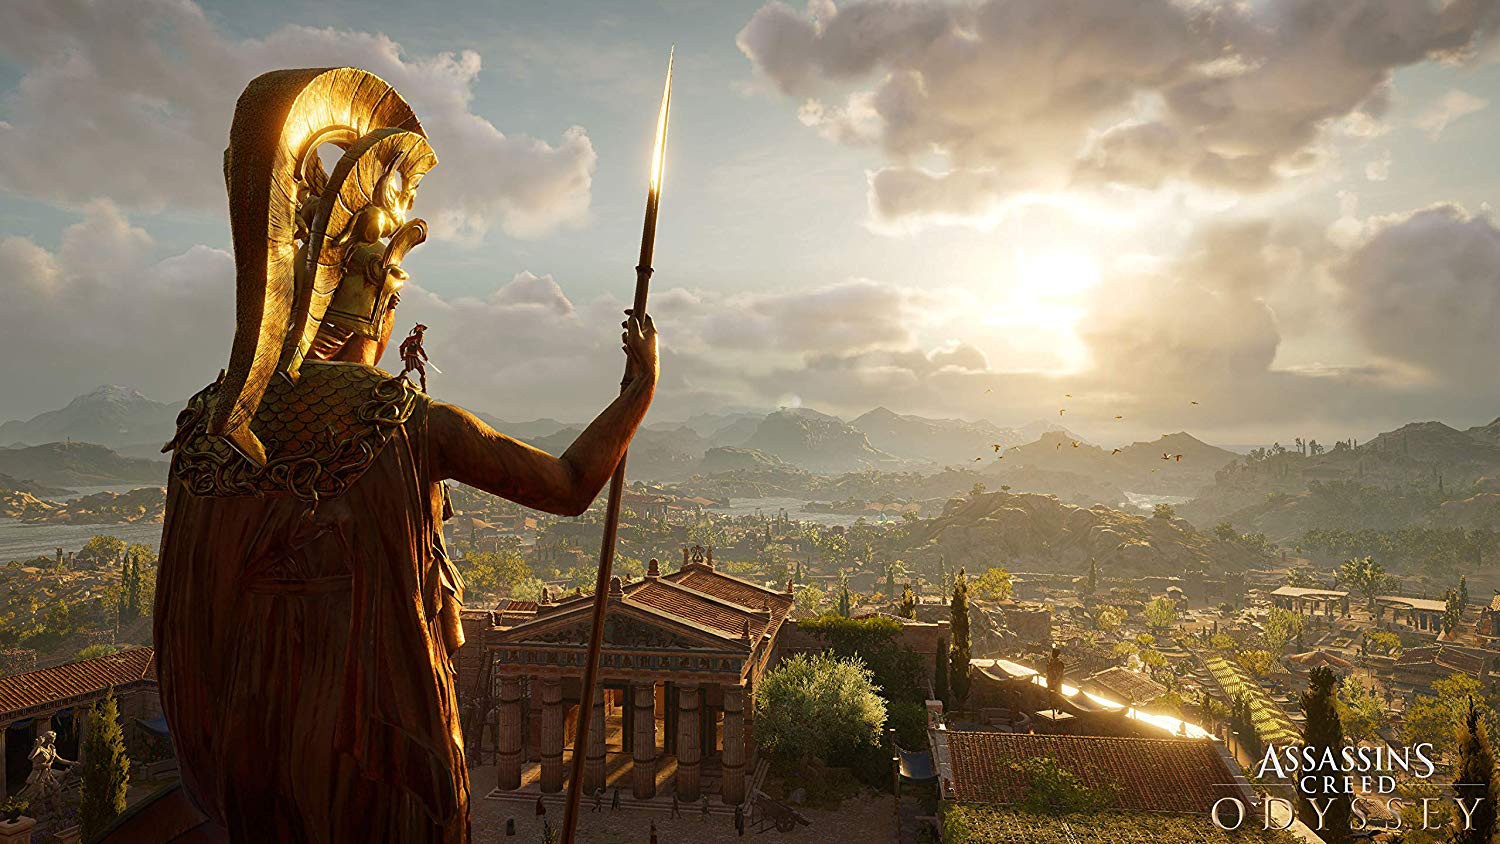 Assassin's Creed Origins + Odyssey Double Pack